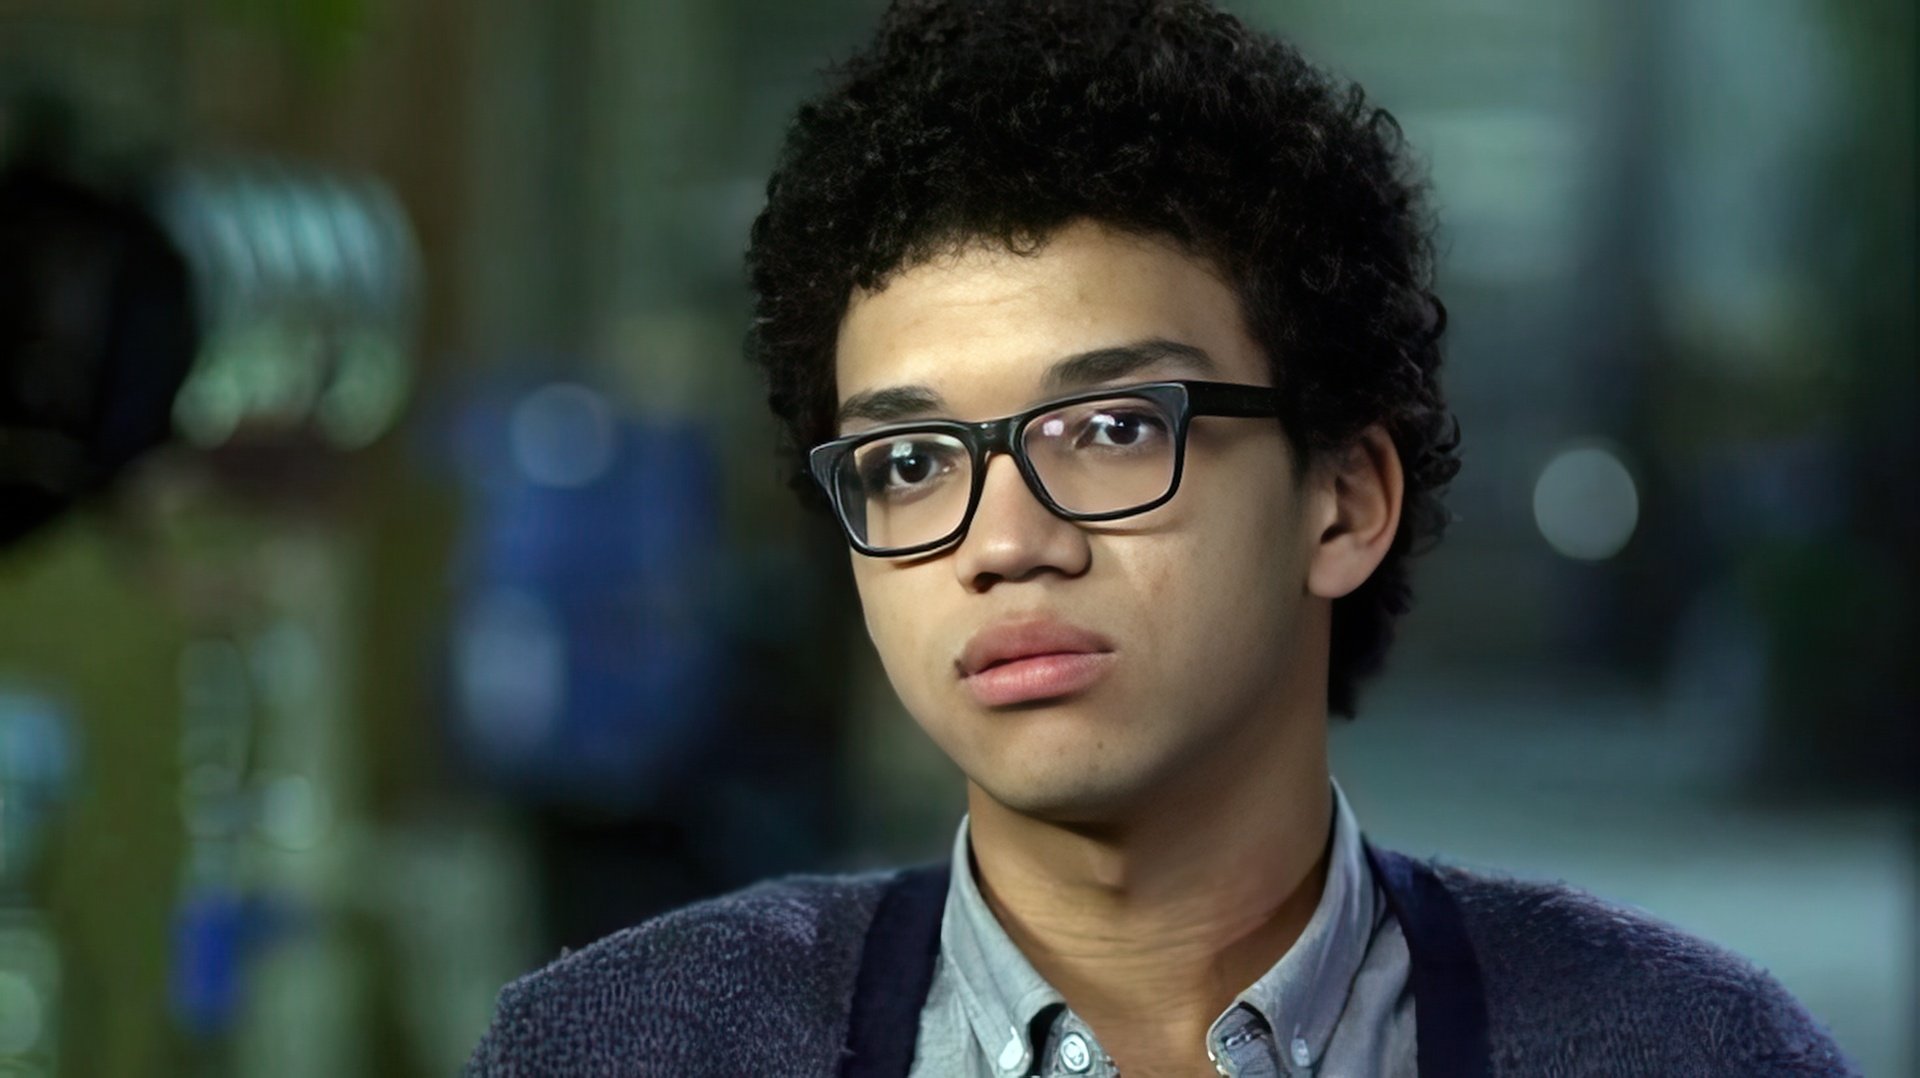 Justice Smith in his youth